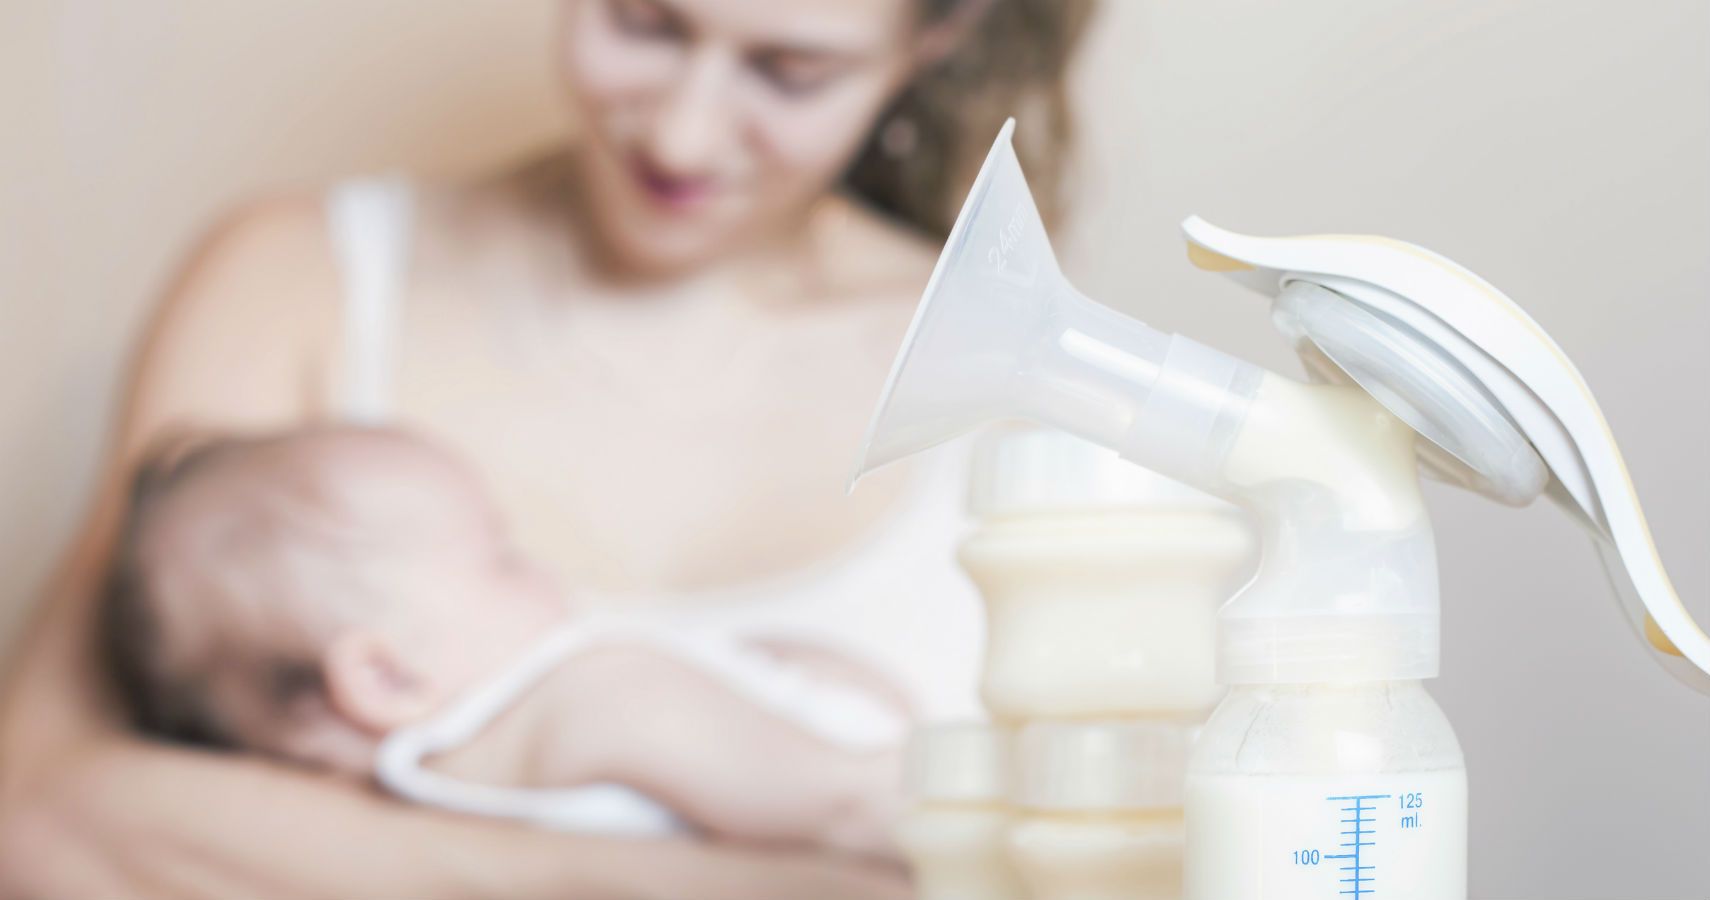 Mom holding baby with breast pump in the foreground